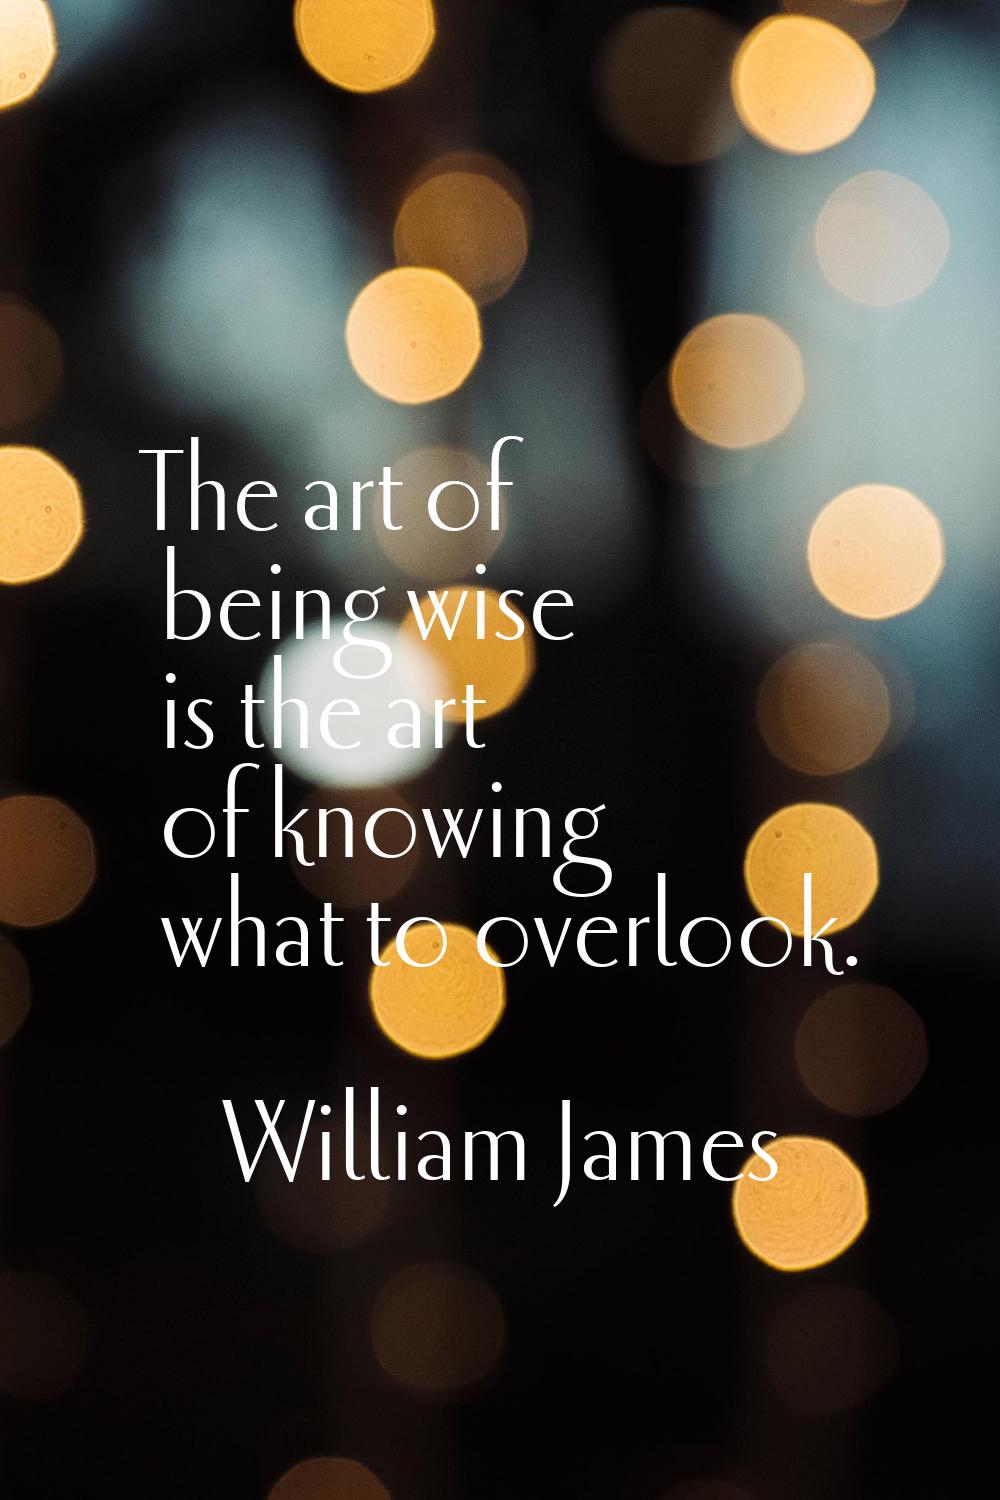 The art of being wise is the art of knowing what to overlook.